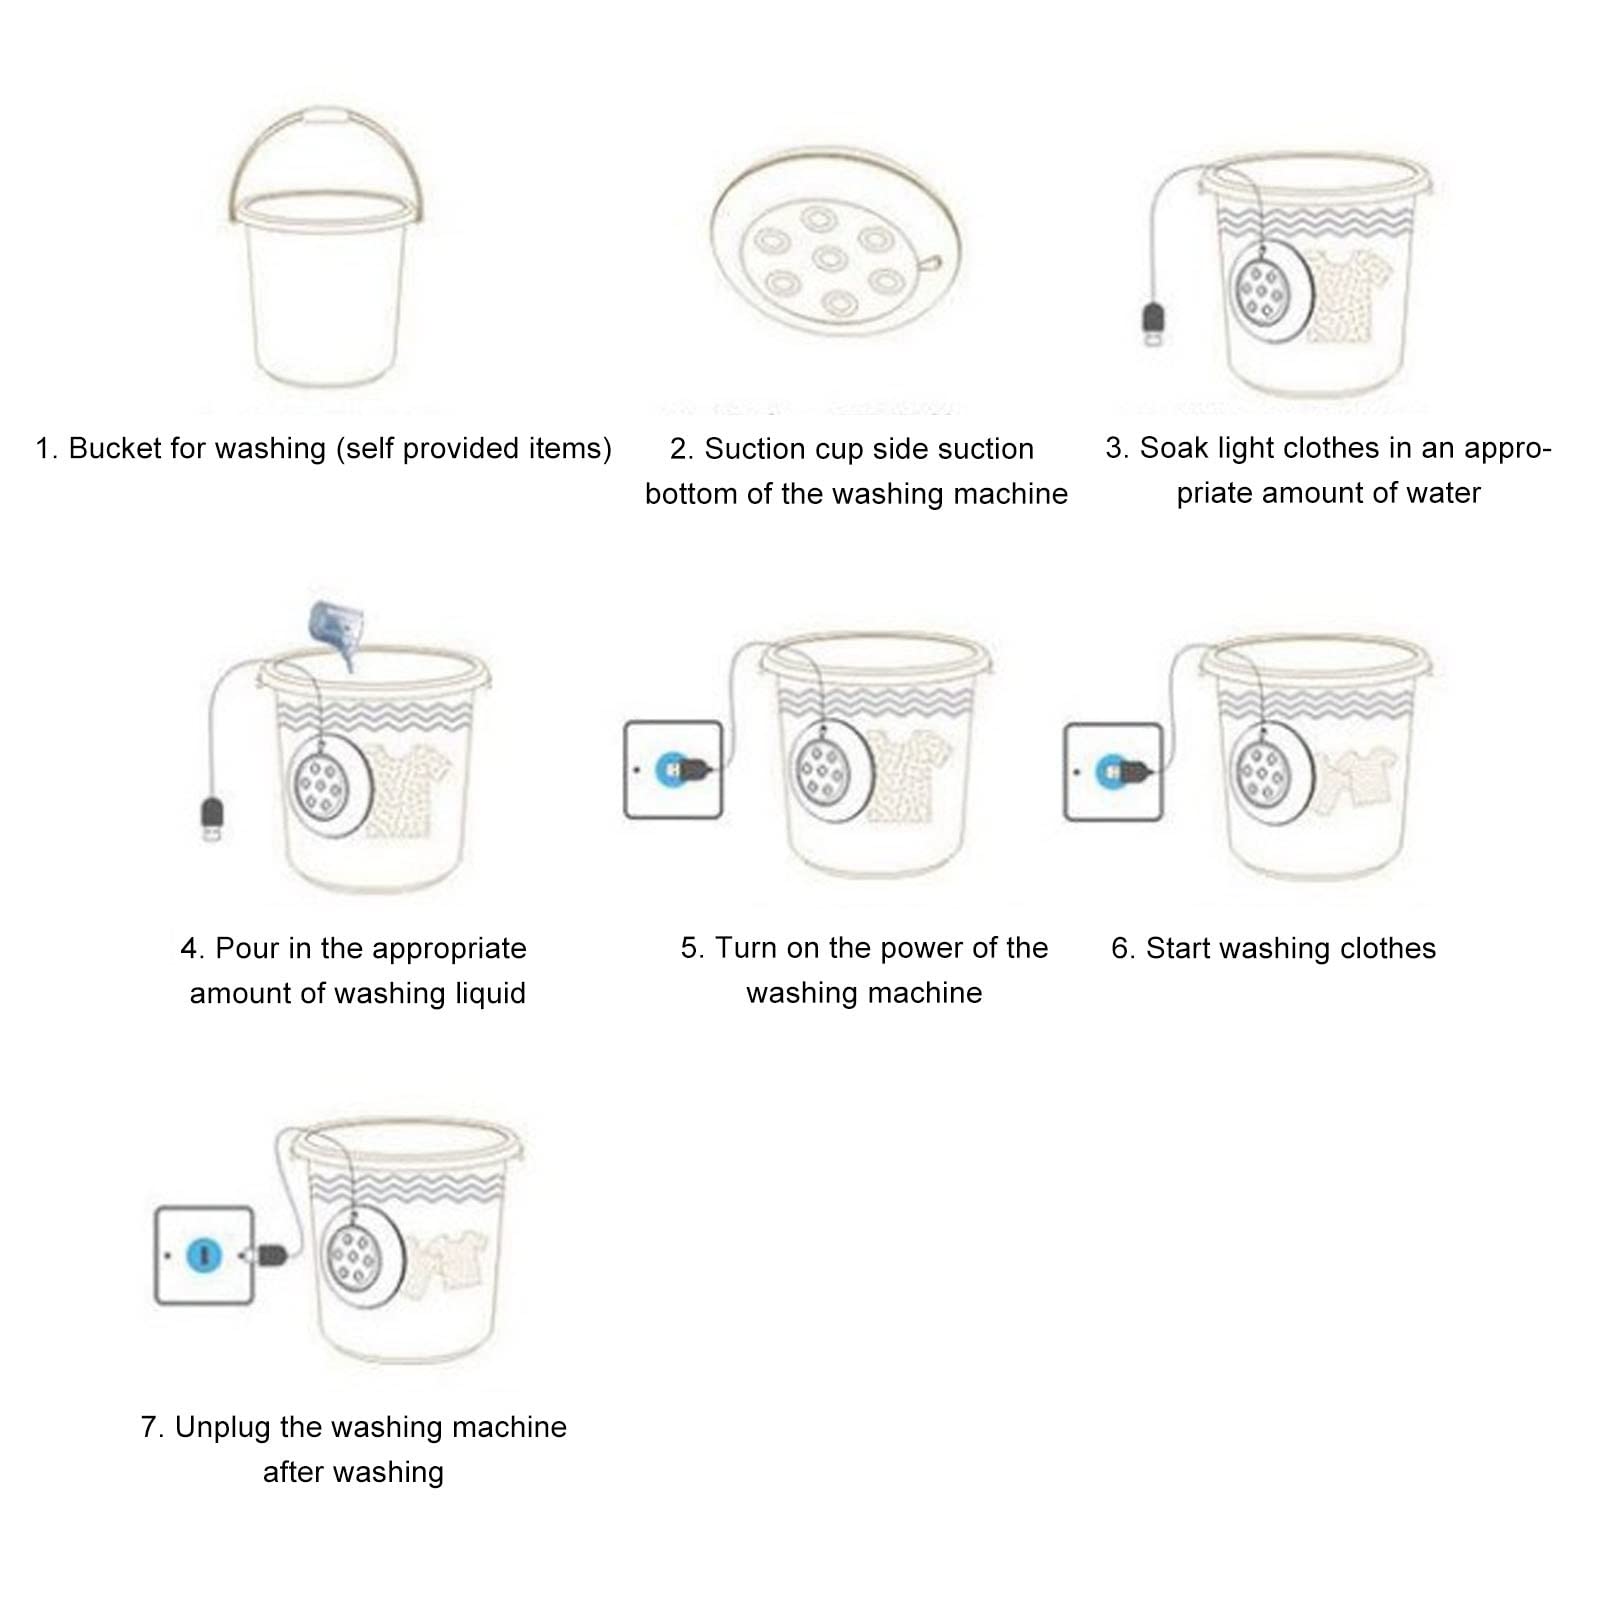 VTOSEN Mini Washing Machine Low Noise USB Powered Portable Washer for Underwear and Socks Cleaning for Travel, Dormitory, Automatic Portable Underwear Washer